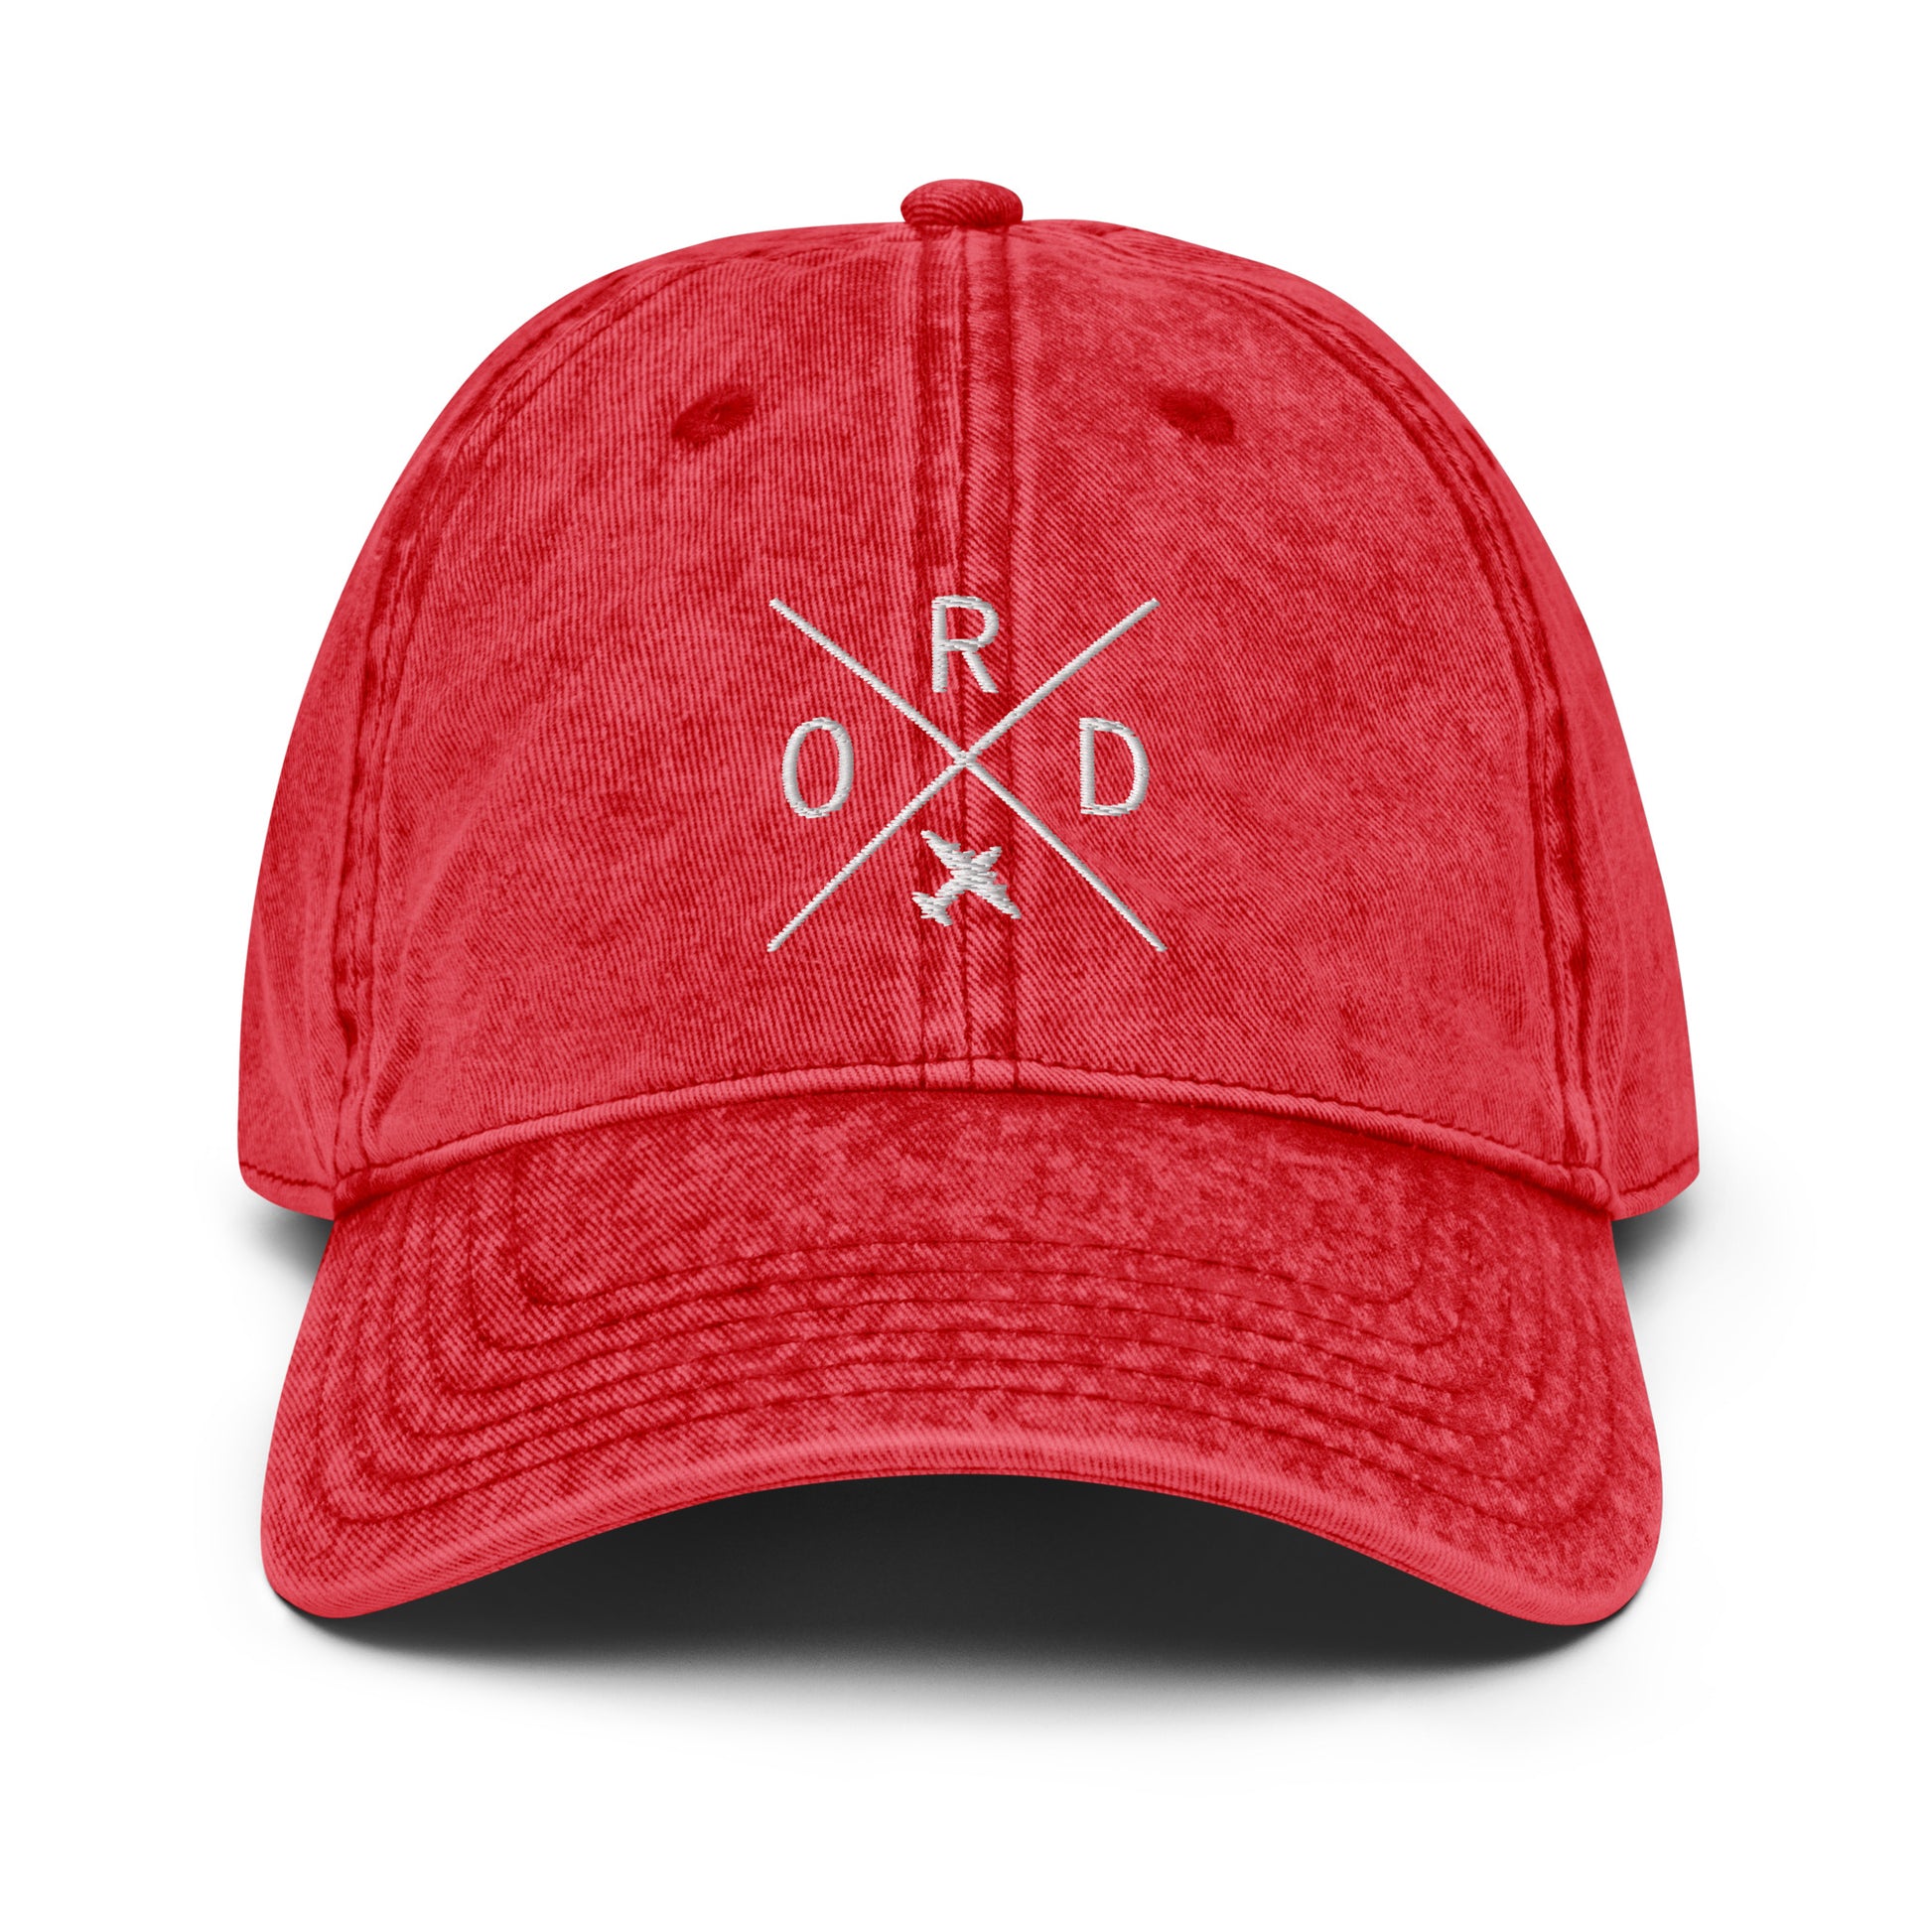 Crossed-X Cotton Twill Cap - White • ORD Chicago • YHM Designs - Image 25